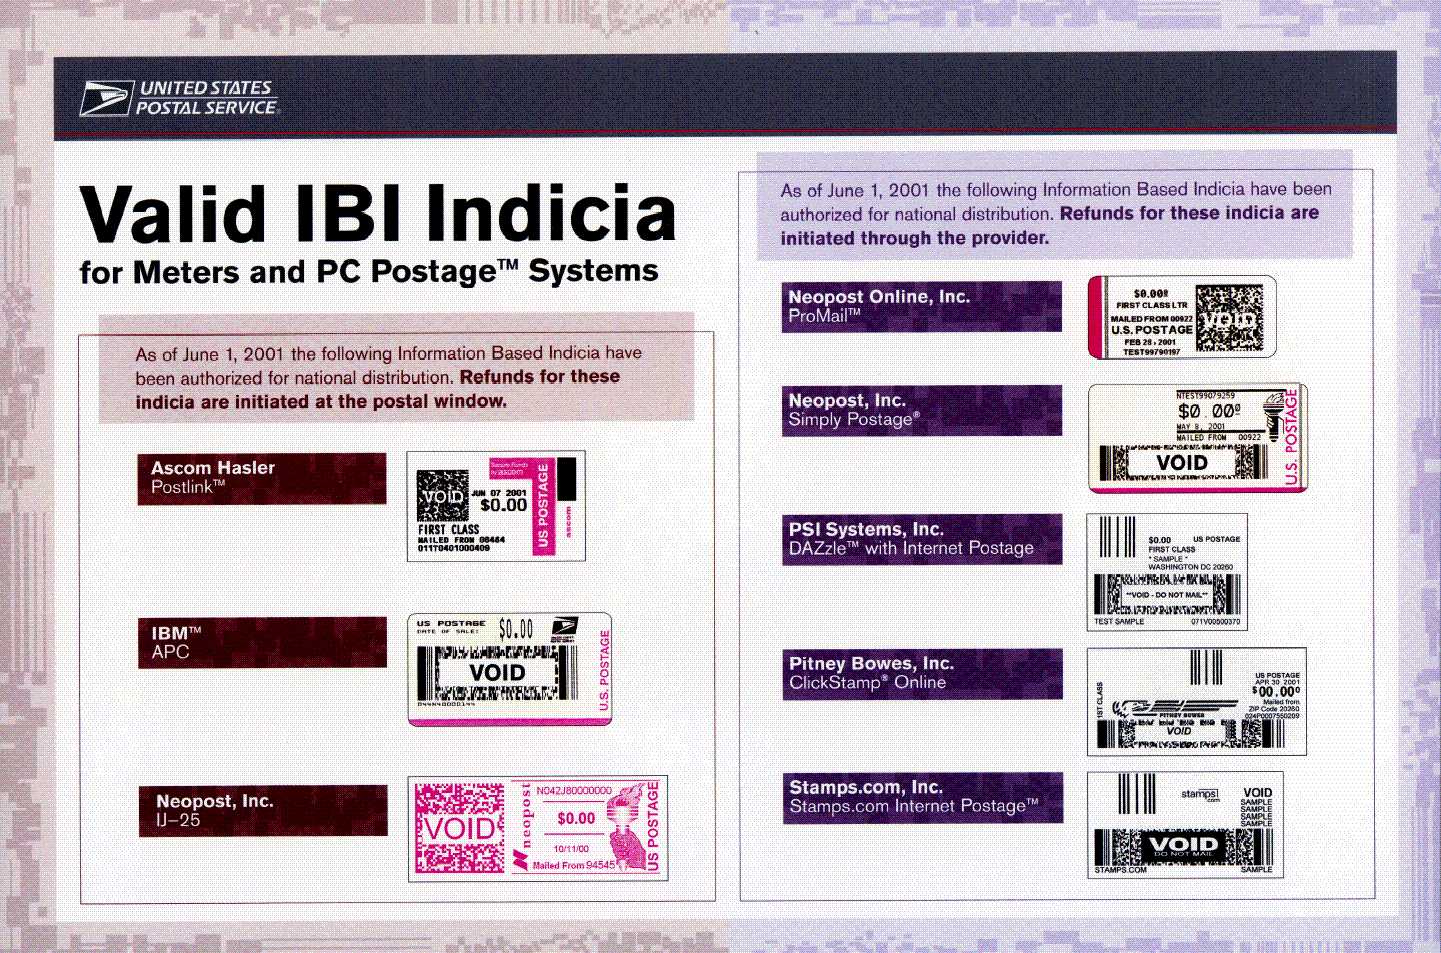 A centerfold color reference sheet for information based indicia (IBI) for meters and PC Postage systems. A d-link is provided